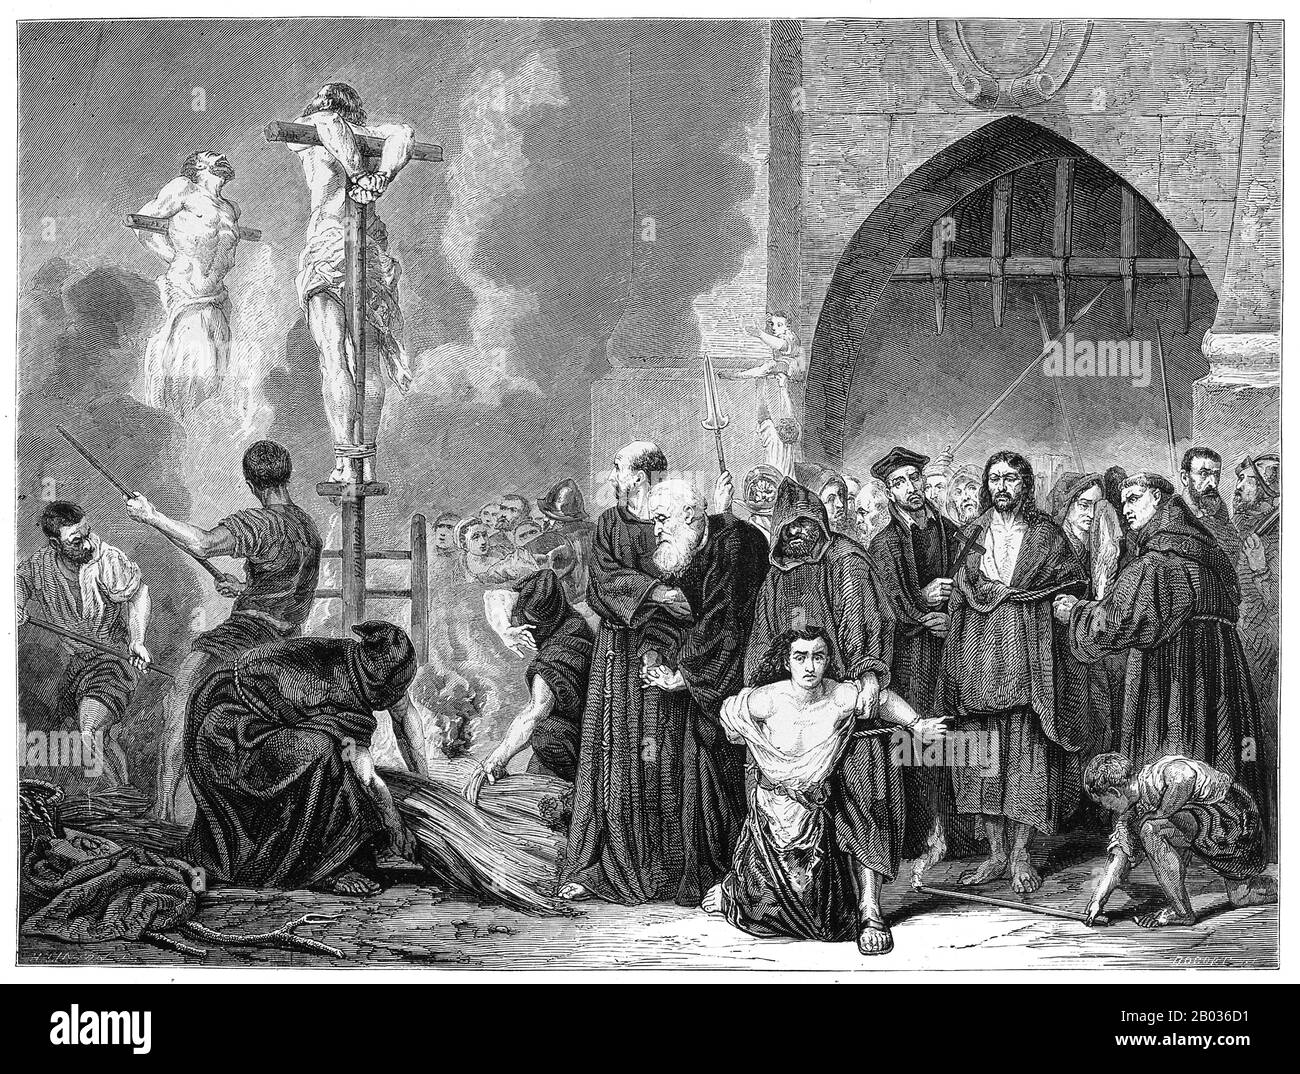 The Tribunal of the Holy Office of the Inquisition (Spanish: Tribunal del Santo Oficio de la Inquisicion), commonly known as the Spanish Inquisition (Inquisicion espanola), was established in 1478 by Catholic Monarchs Ferdinand II of Aragon and Isabella I of Castile.  The Inquisition was originally intended primarily to ensure the orthodoxy of those who converted from Judaism and Islam. The regulation of the faith of the newly converted was intensified after the royal decrees issued in 1492 and 1502 ordering Jews and Muslims to convert or leave Spain.  The Inquisition was not definitively abol Stock Photo